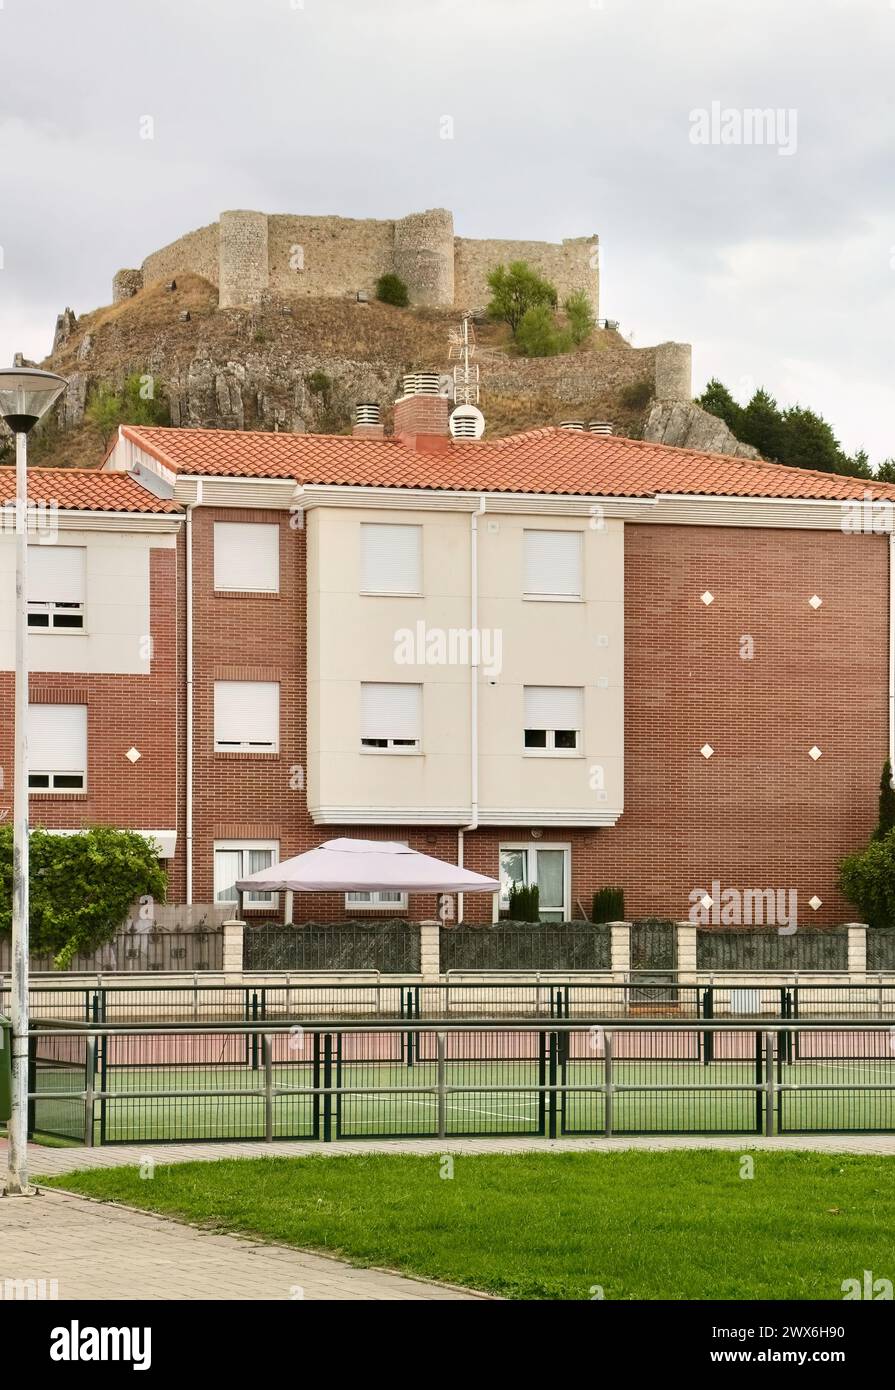 Ruined eleventh century hilltop castle overlooking a modern apartment building in the town of Aguilar de Campoo Palencia Castile and Leon Spain Stock Photo